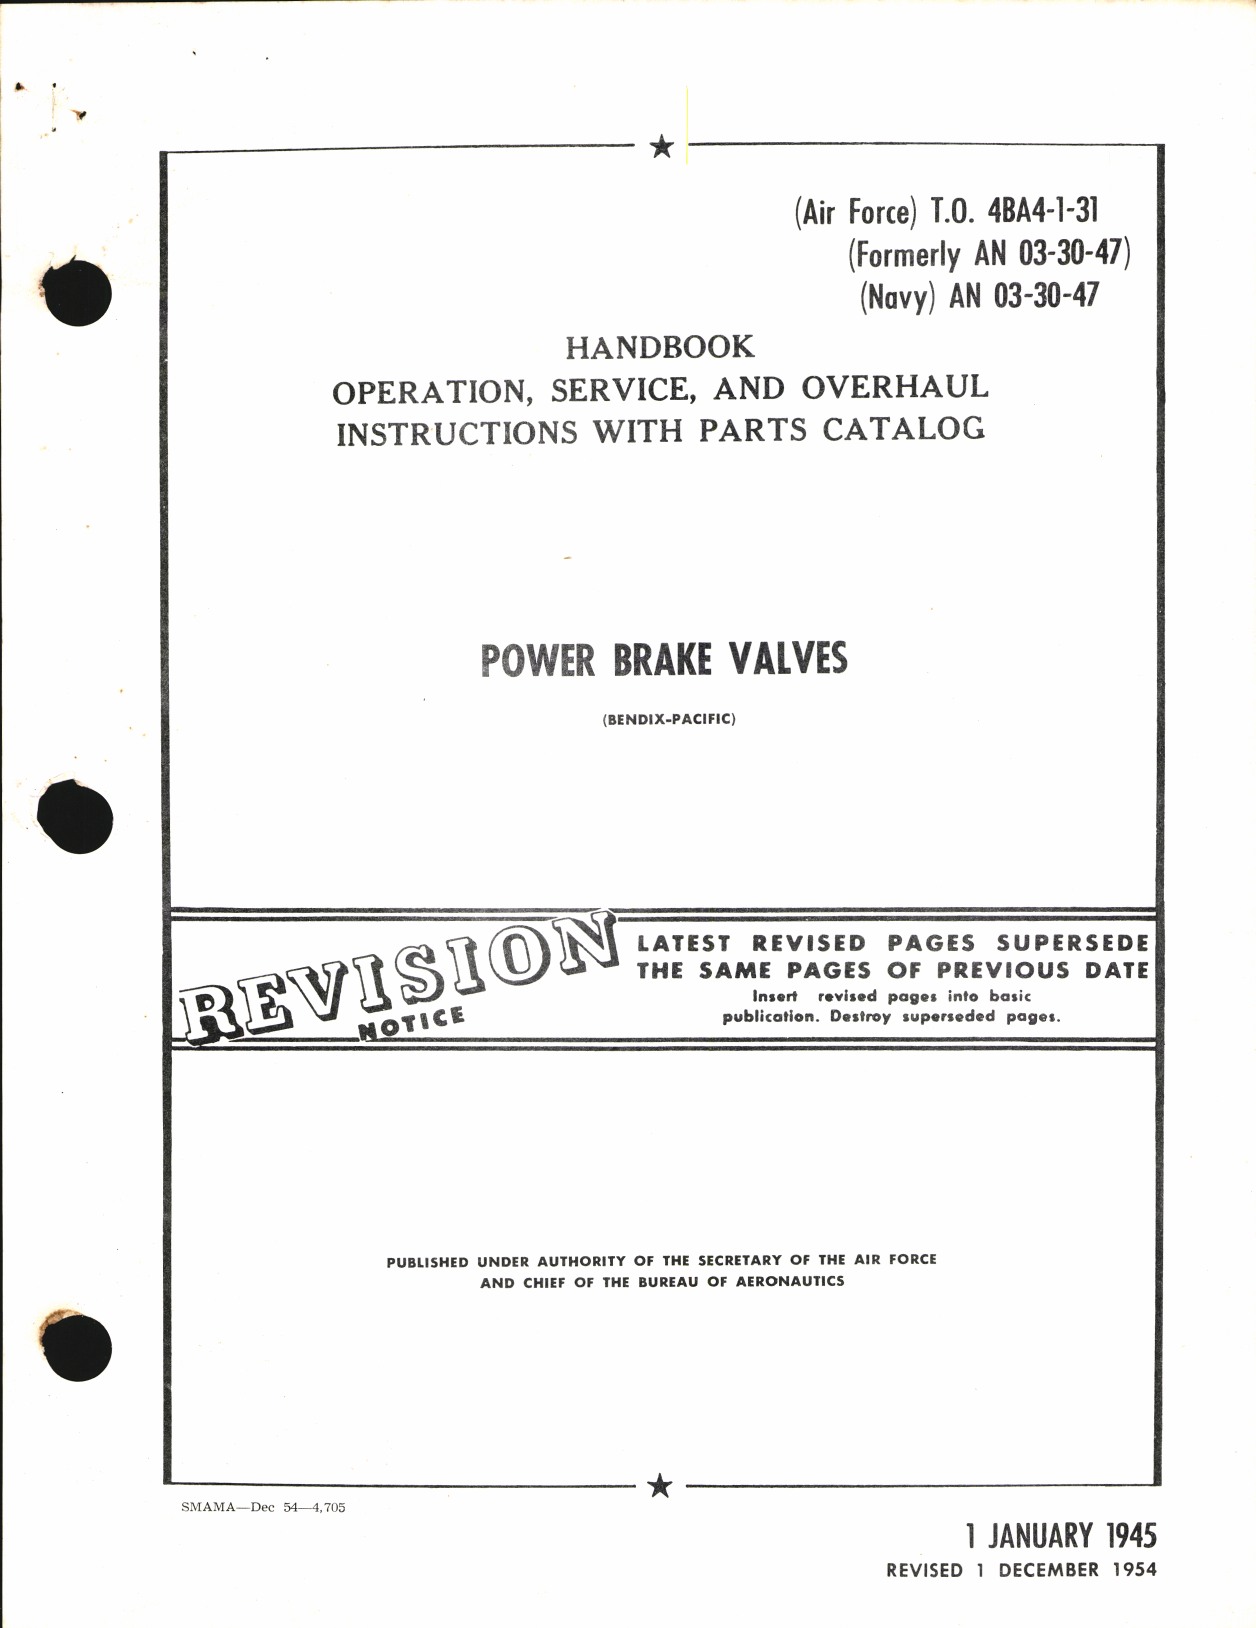 Sample page 1 from AirCorps Library document: Operation, Service & Overhaul Instructions with Parts Catalog for Power Brake Valves